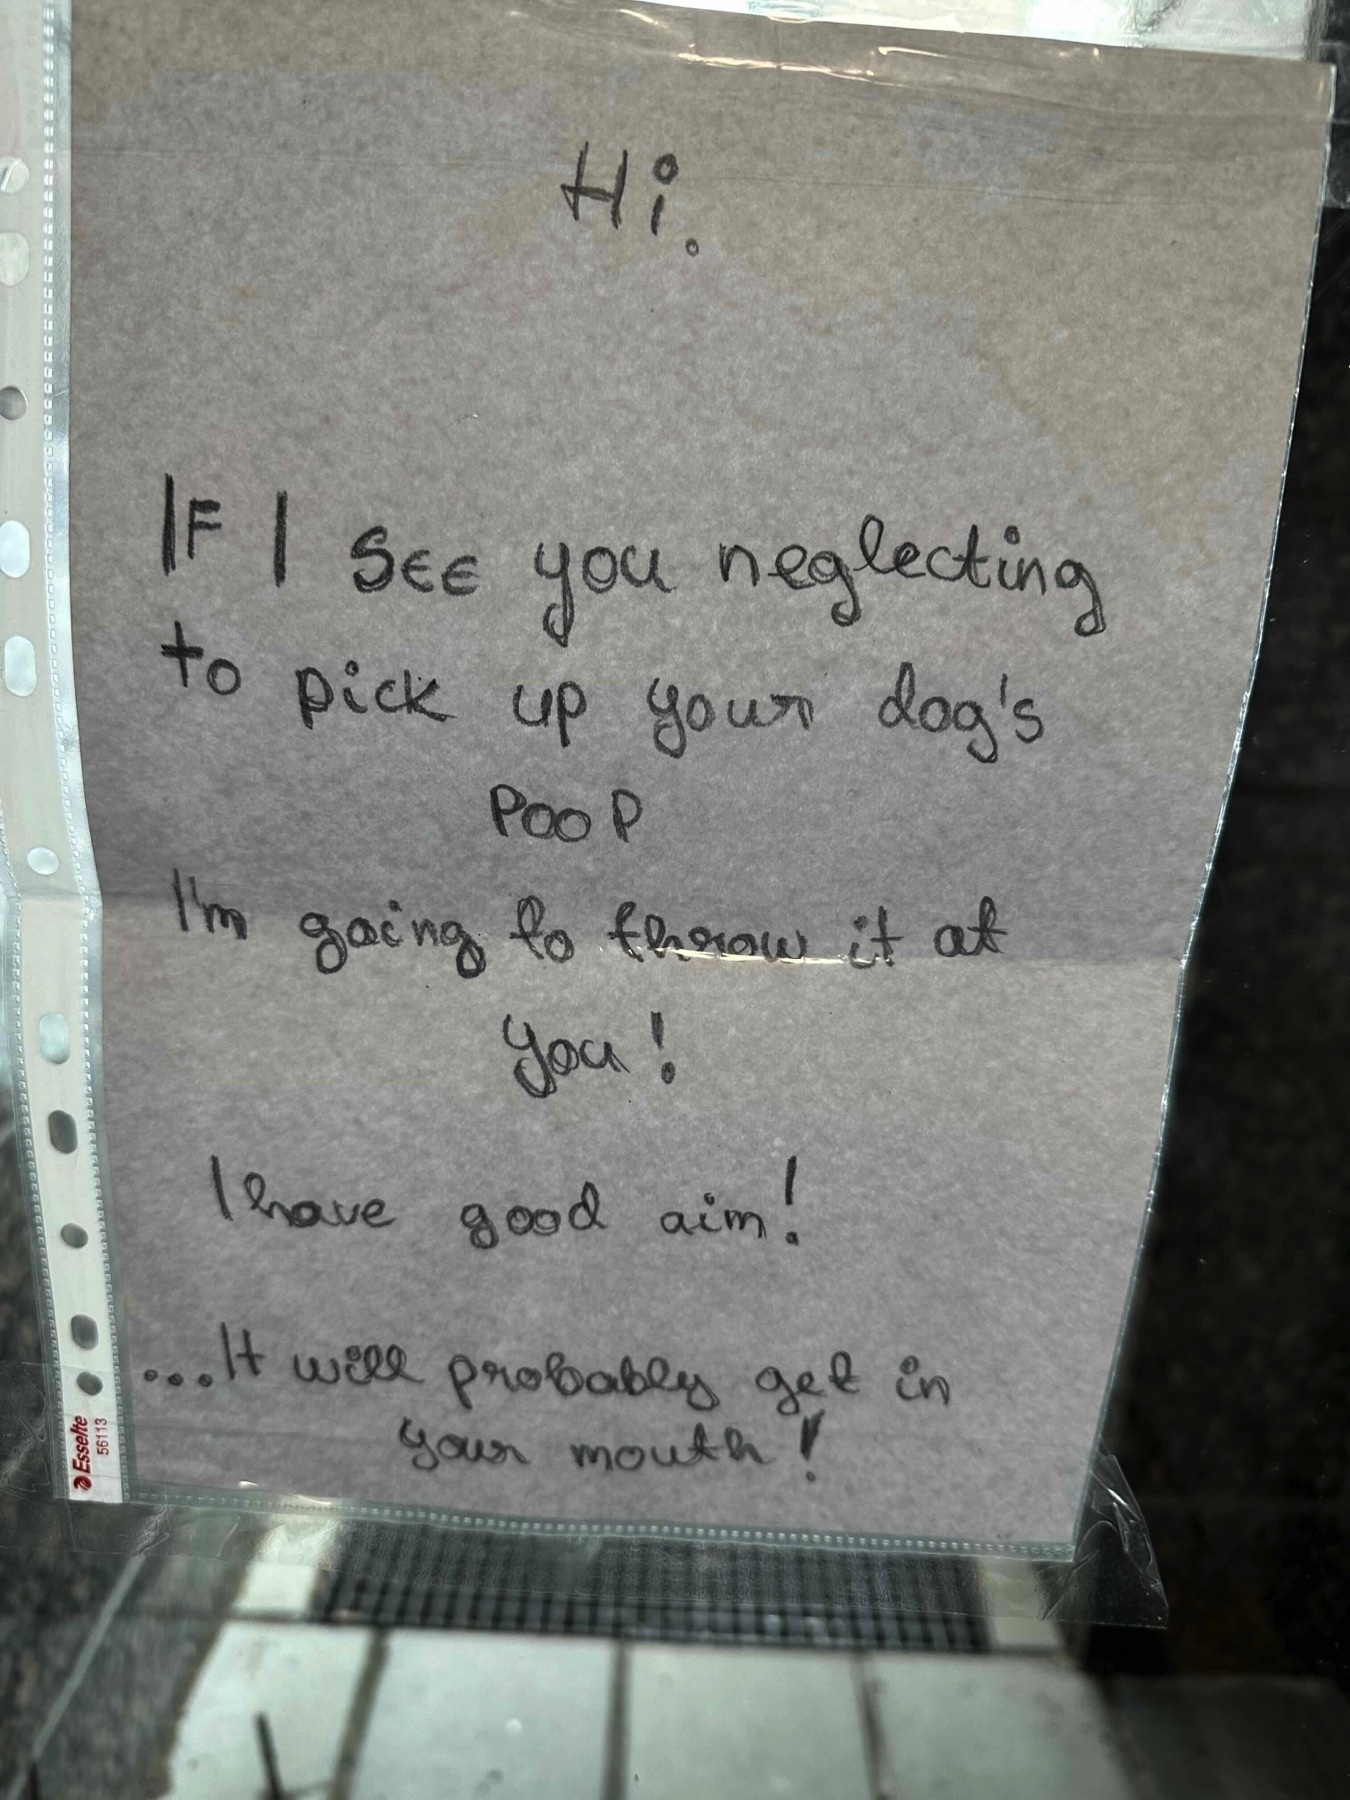 Note attached to a glass door. Note is written with a soft pencil in a delicate cursive. Note says: “If I see you neglecting to pick your dog’s poop. I am going to throw it at you! I have good aim! …It will probably get in your mouth!”